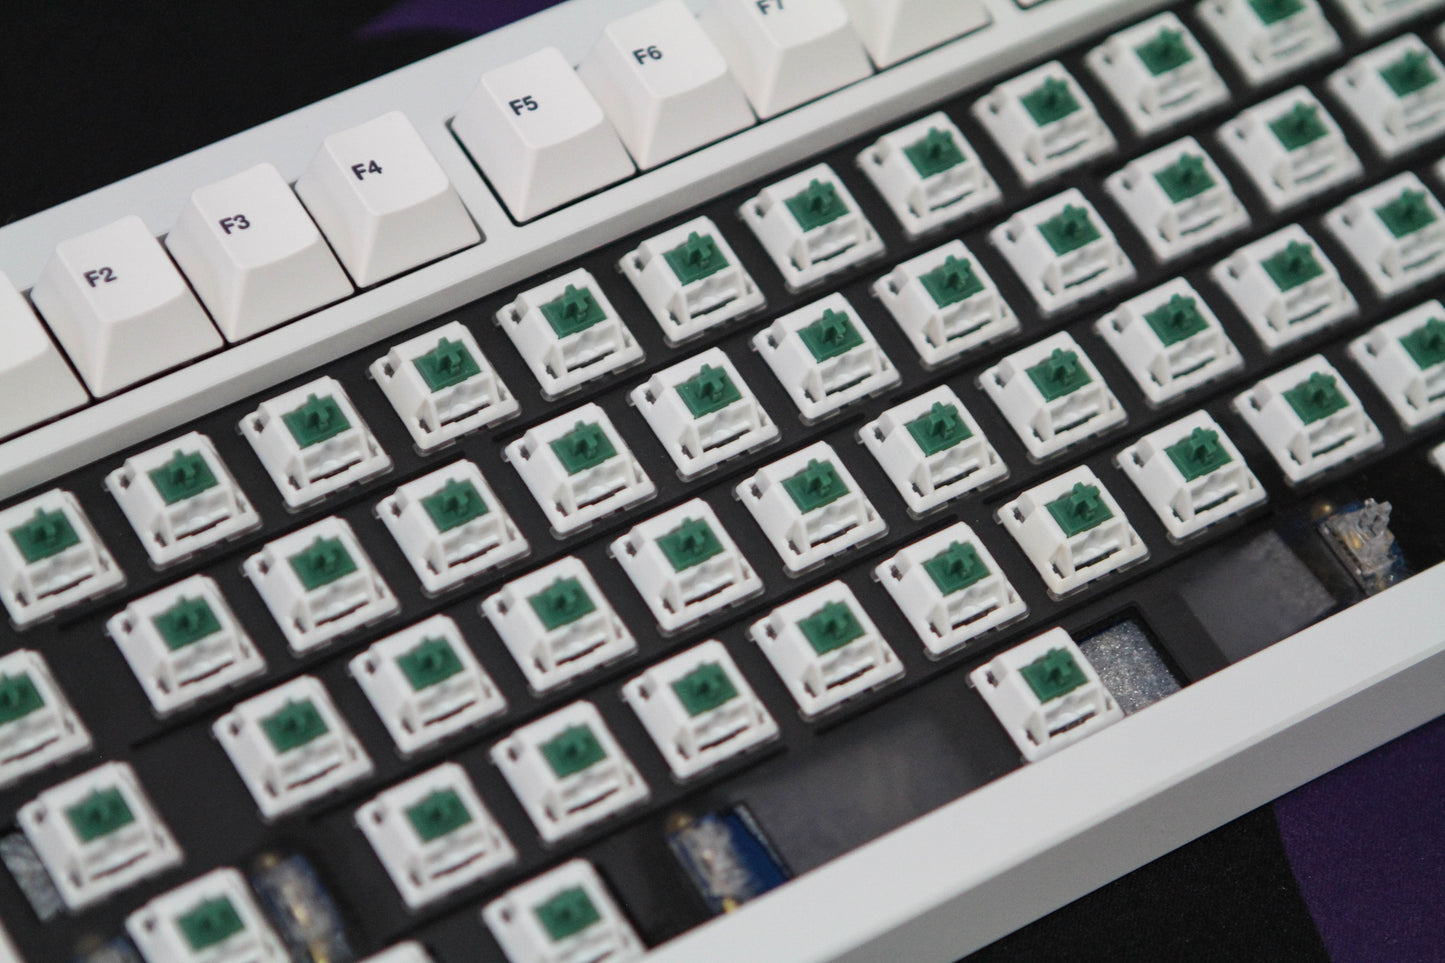 Close-up shot of BBN Linear switches in a keyboard with keycaps removed